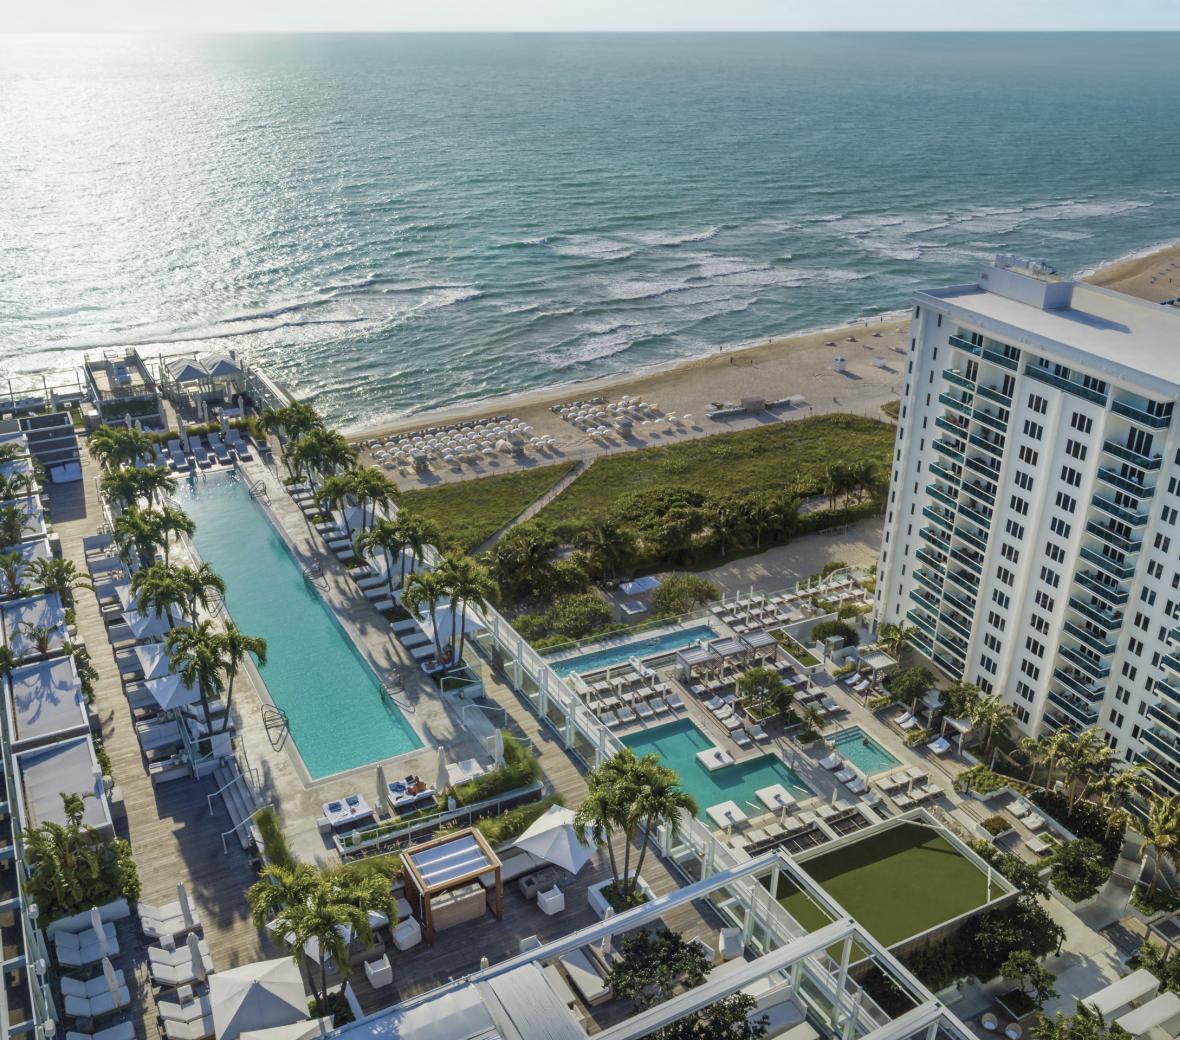 Aerial view of hotel in Miami located by the beach.